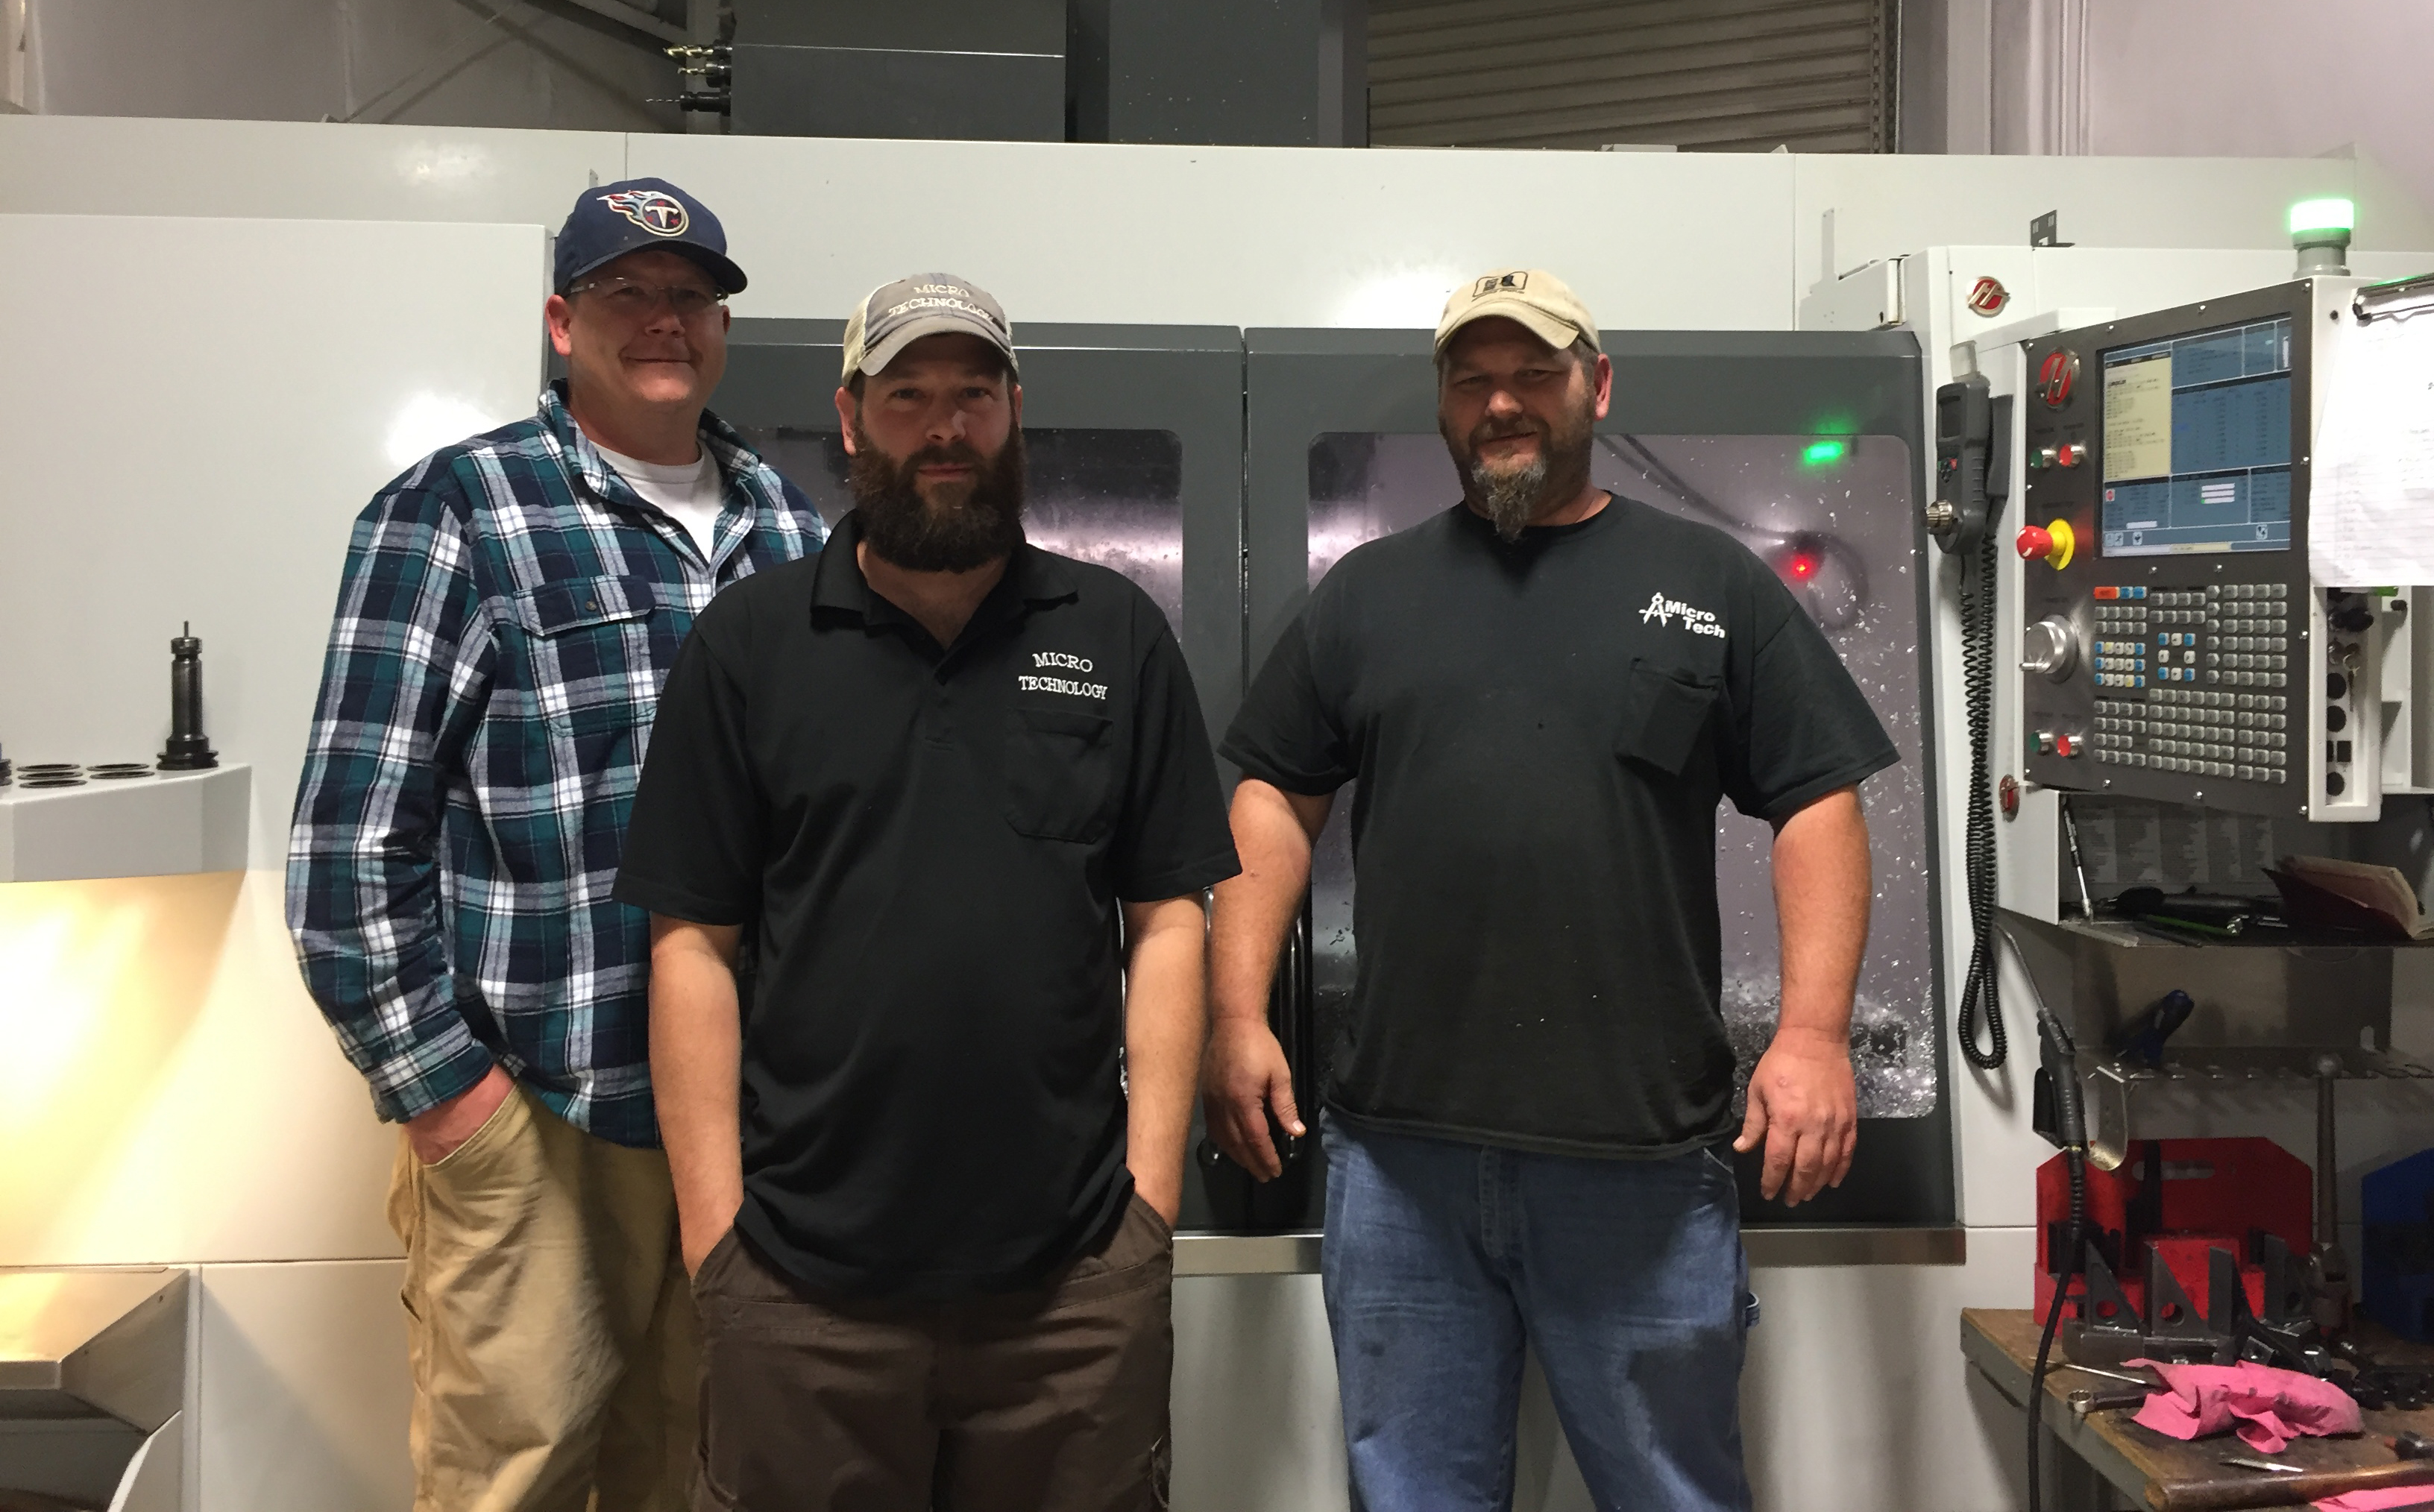 Pictured from left to right: Ted Pierce– Shop Foreman/ CNC Programmer; Charlie Wright, Jr. – General Manager; John Hargrove- Lead CNC Setup/Operator